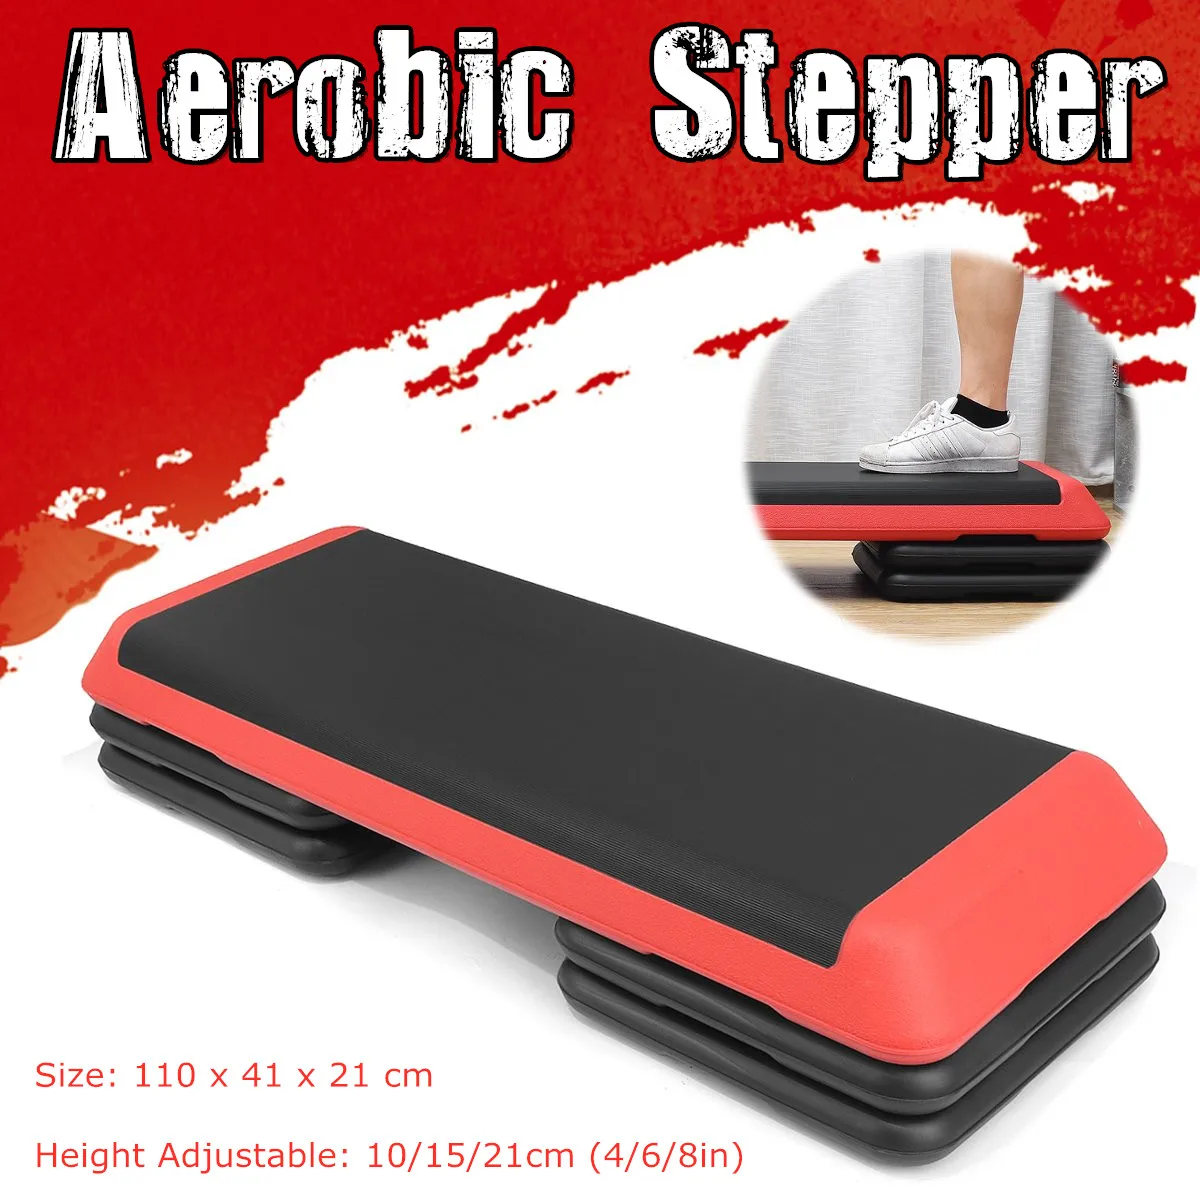 

Adjustable Non-slip Cardio Yoga Pedal Stepper Gym Workout Exercise Fitness Aerobic Step Equipment 250kg